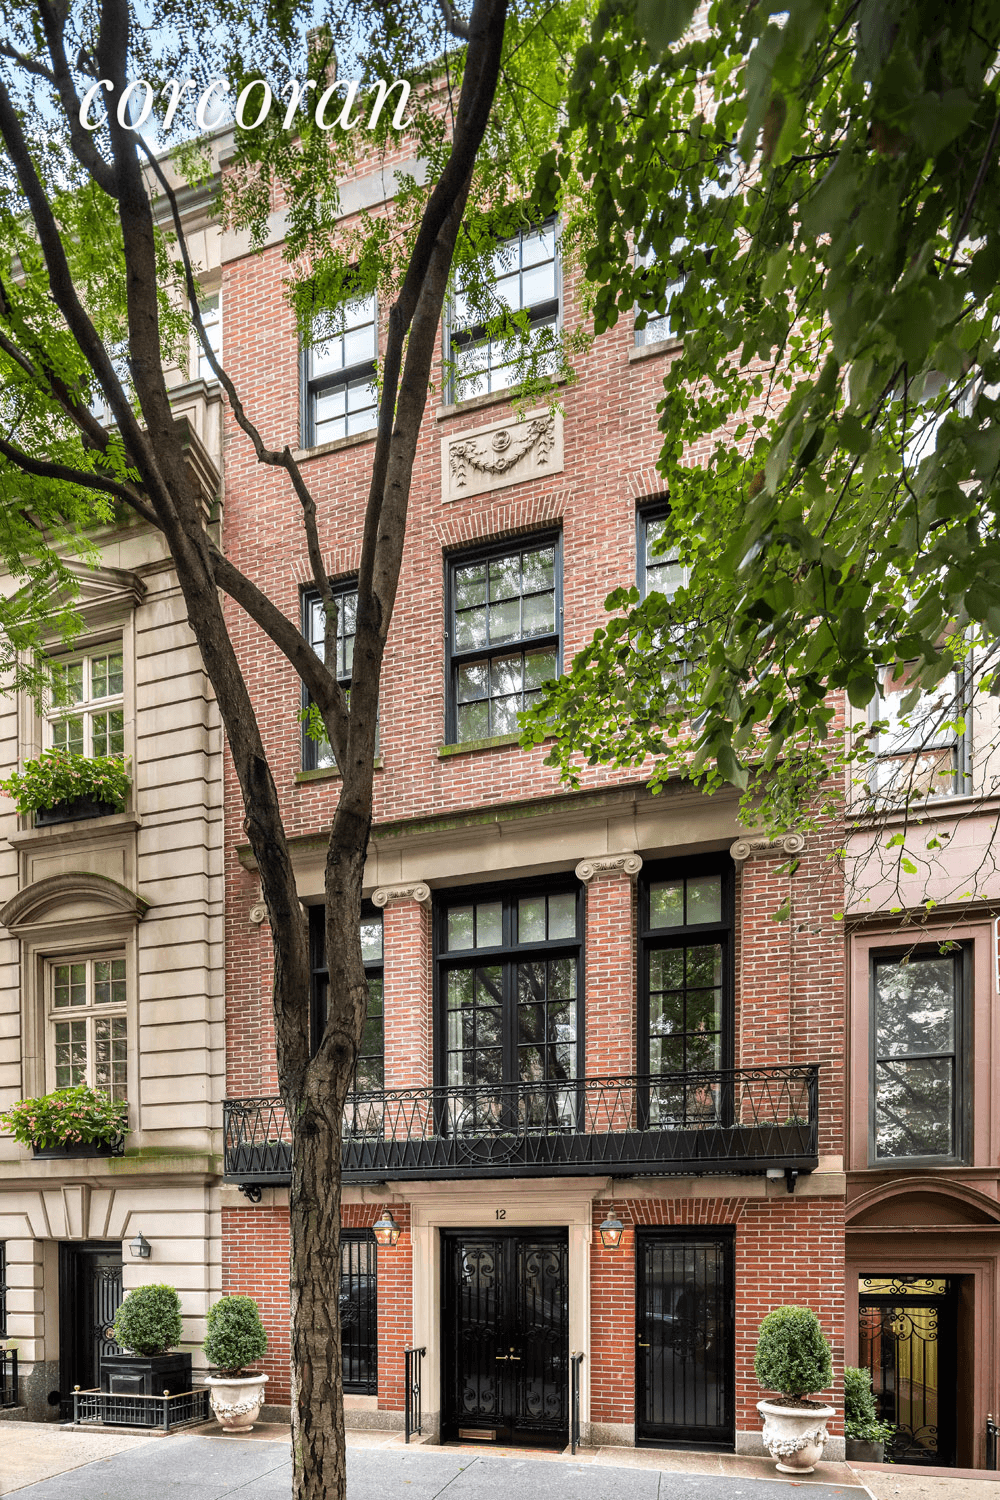 Built in 1883 by renowned New York architects Arthur M.